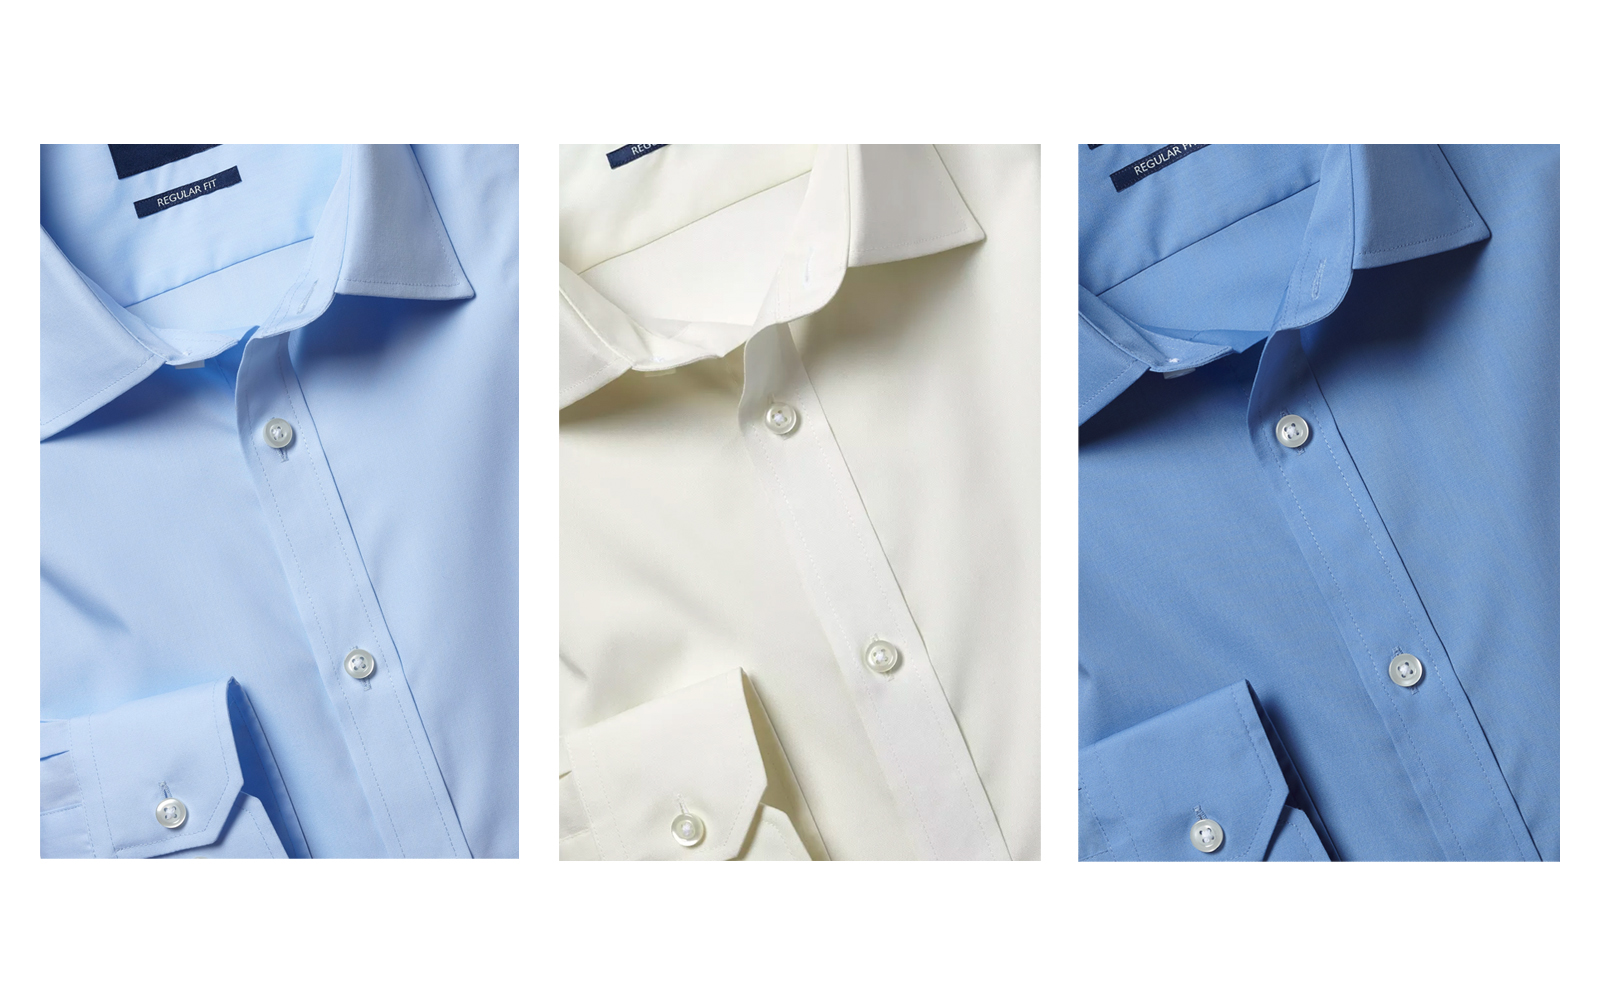 The Ultimate Guide to Washing Poplin Fabric